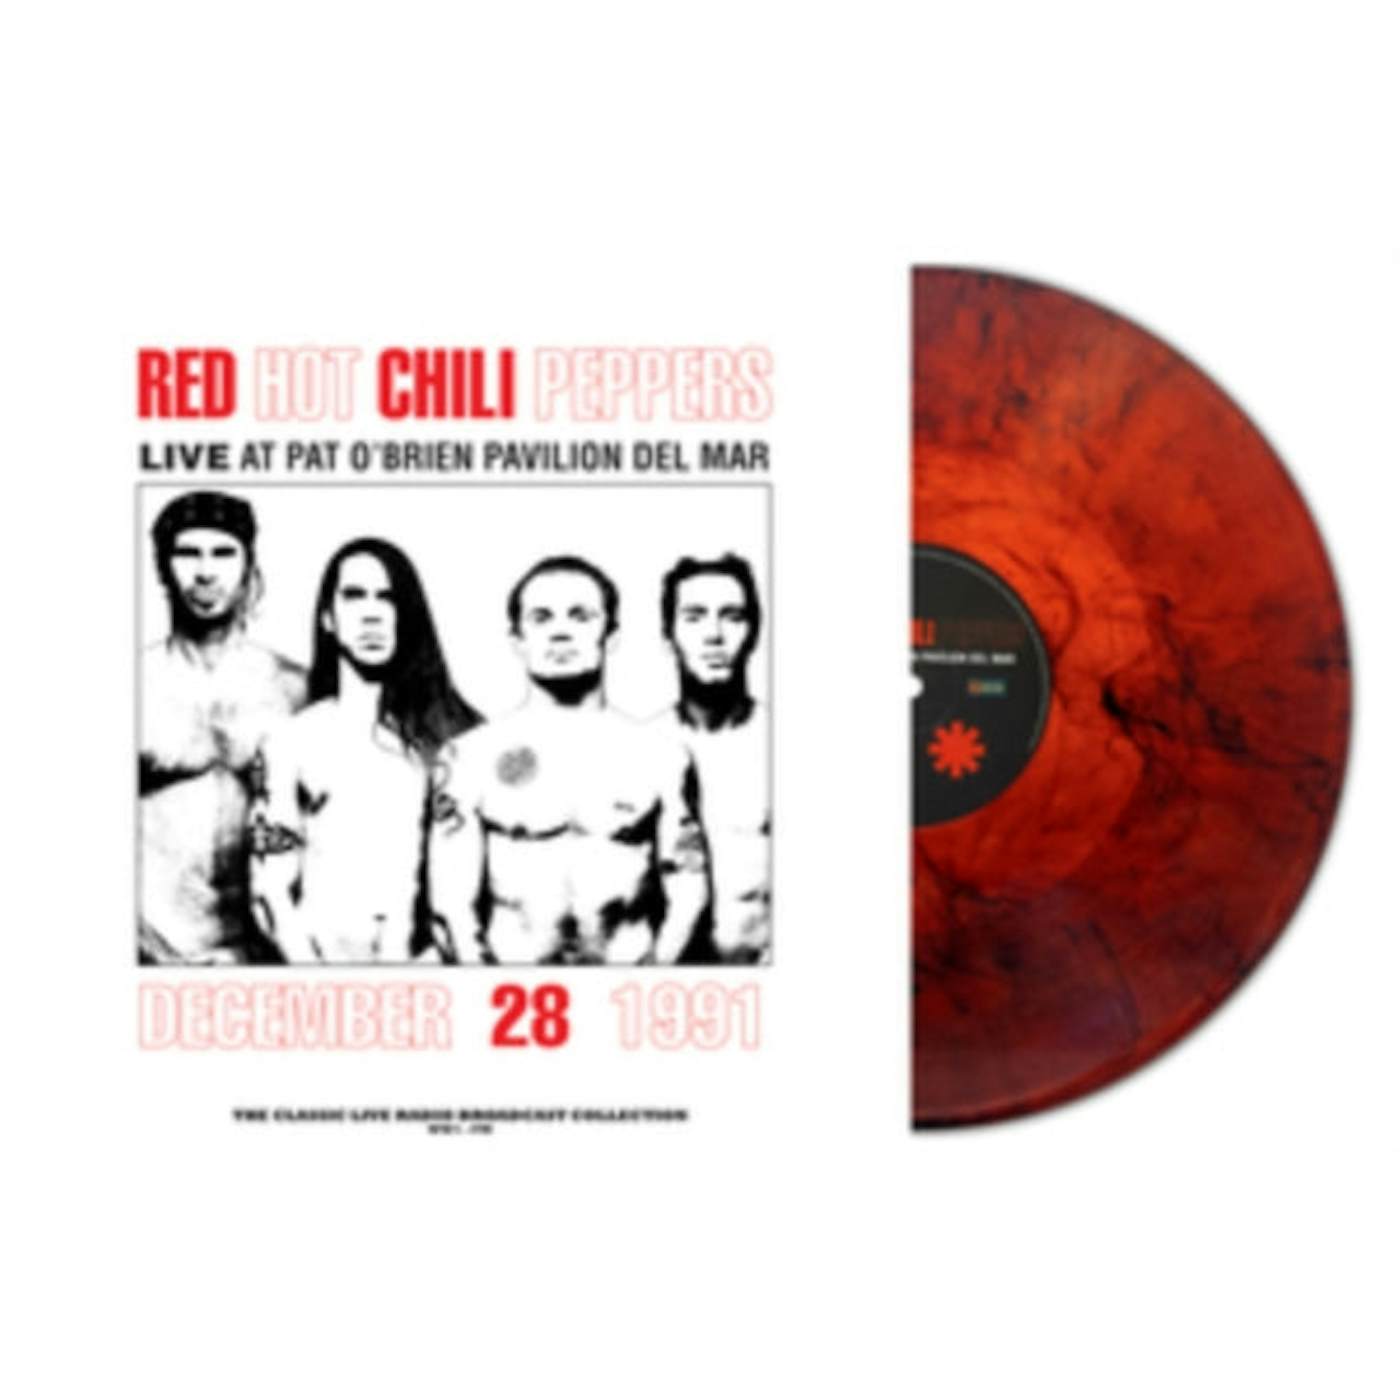 Red Hot Chili Peppers LP Vinyl Record - At Pat O Brien Pavilion Del Mar (Red Marble Vinyl)